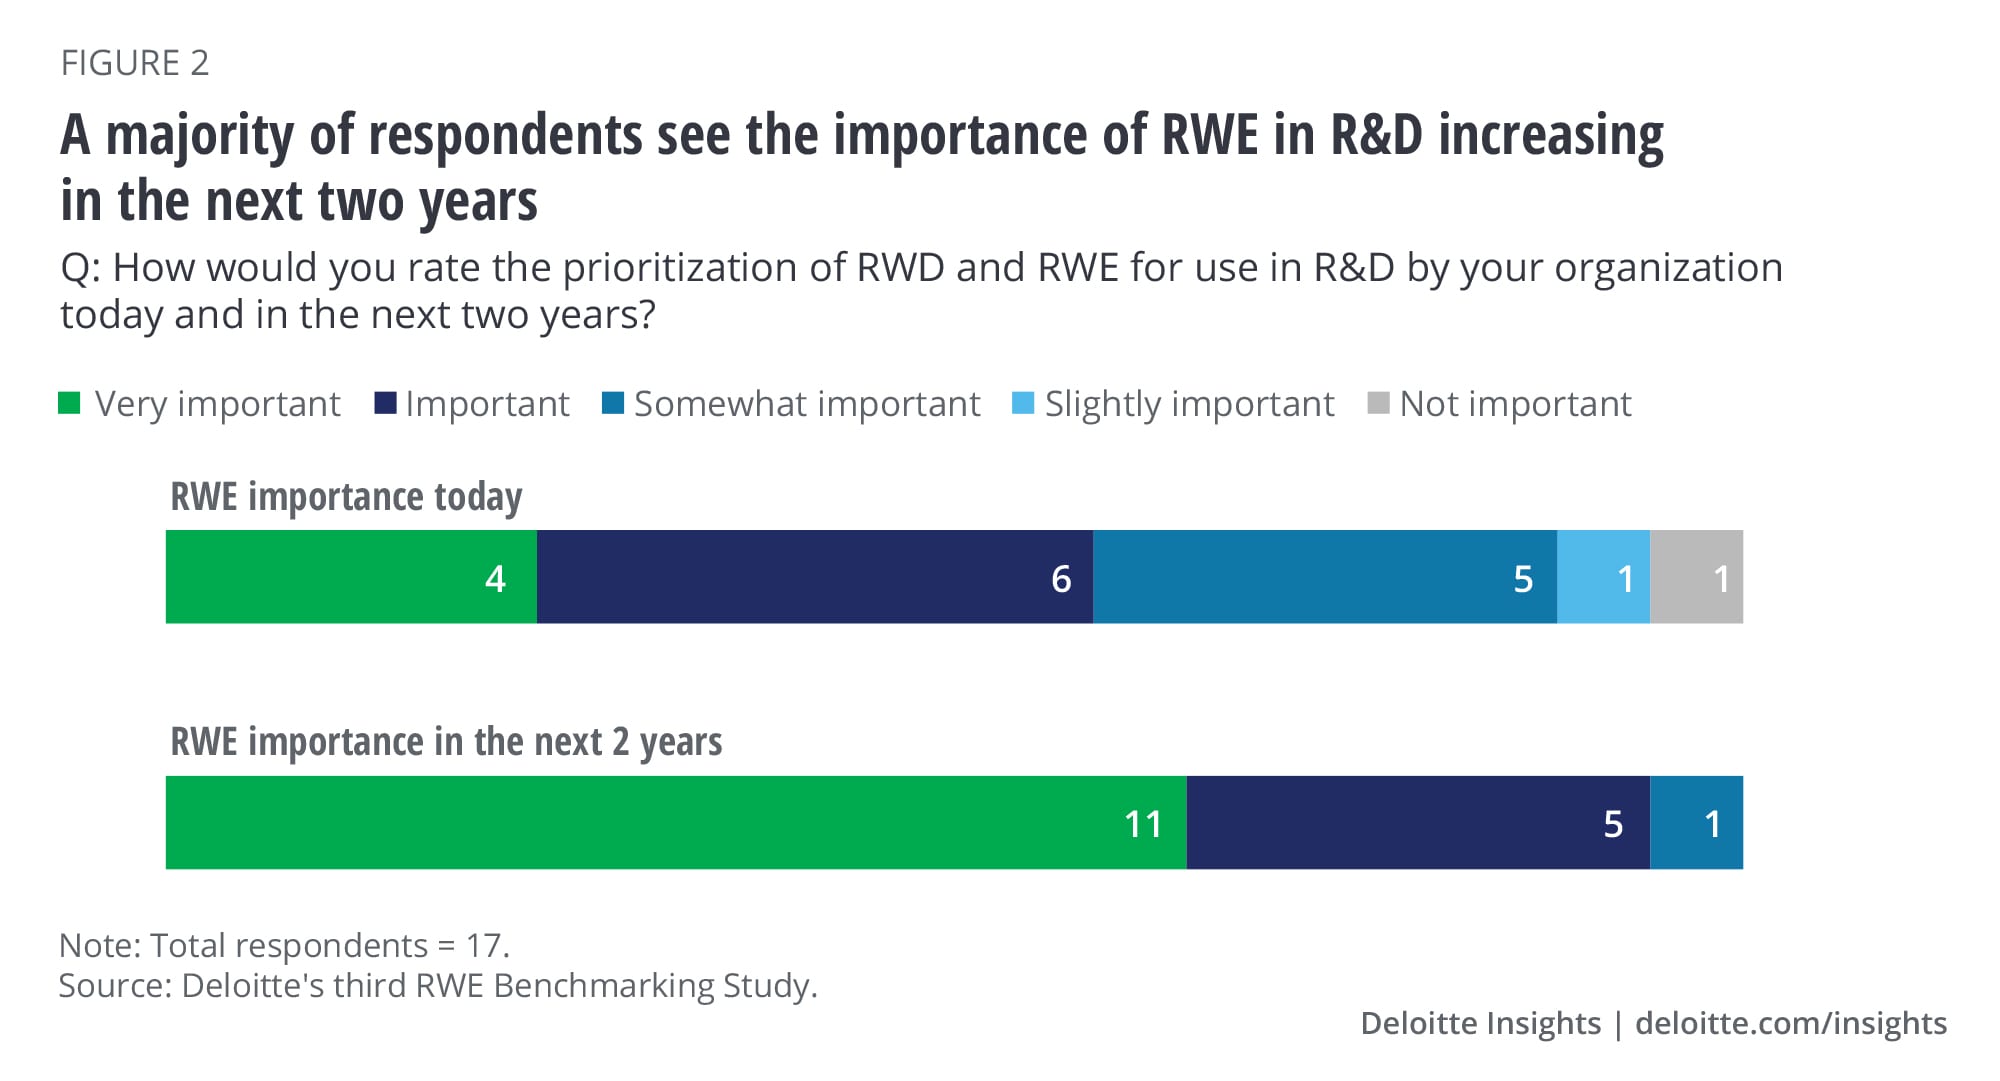 A majority of respondents see the importance of RWE in R&D increasing in the next two years